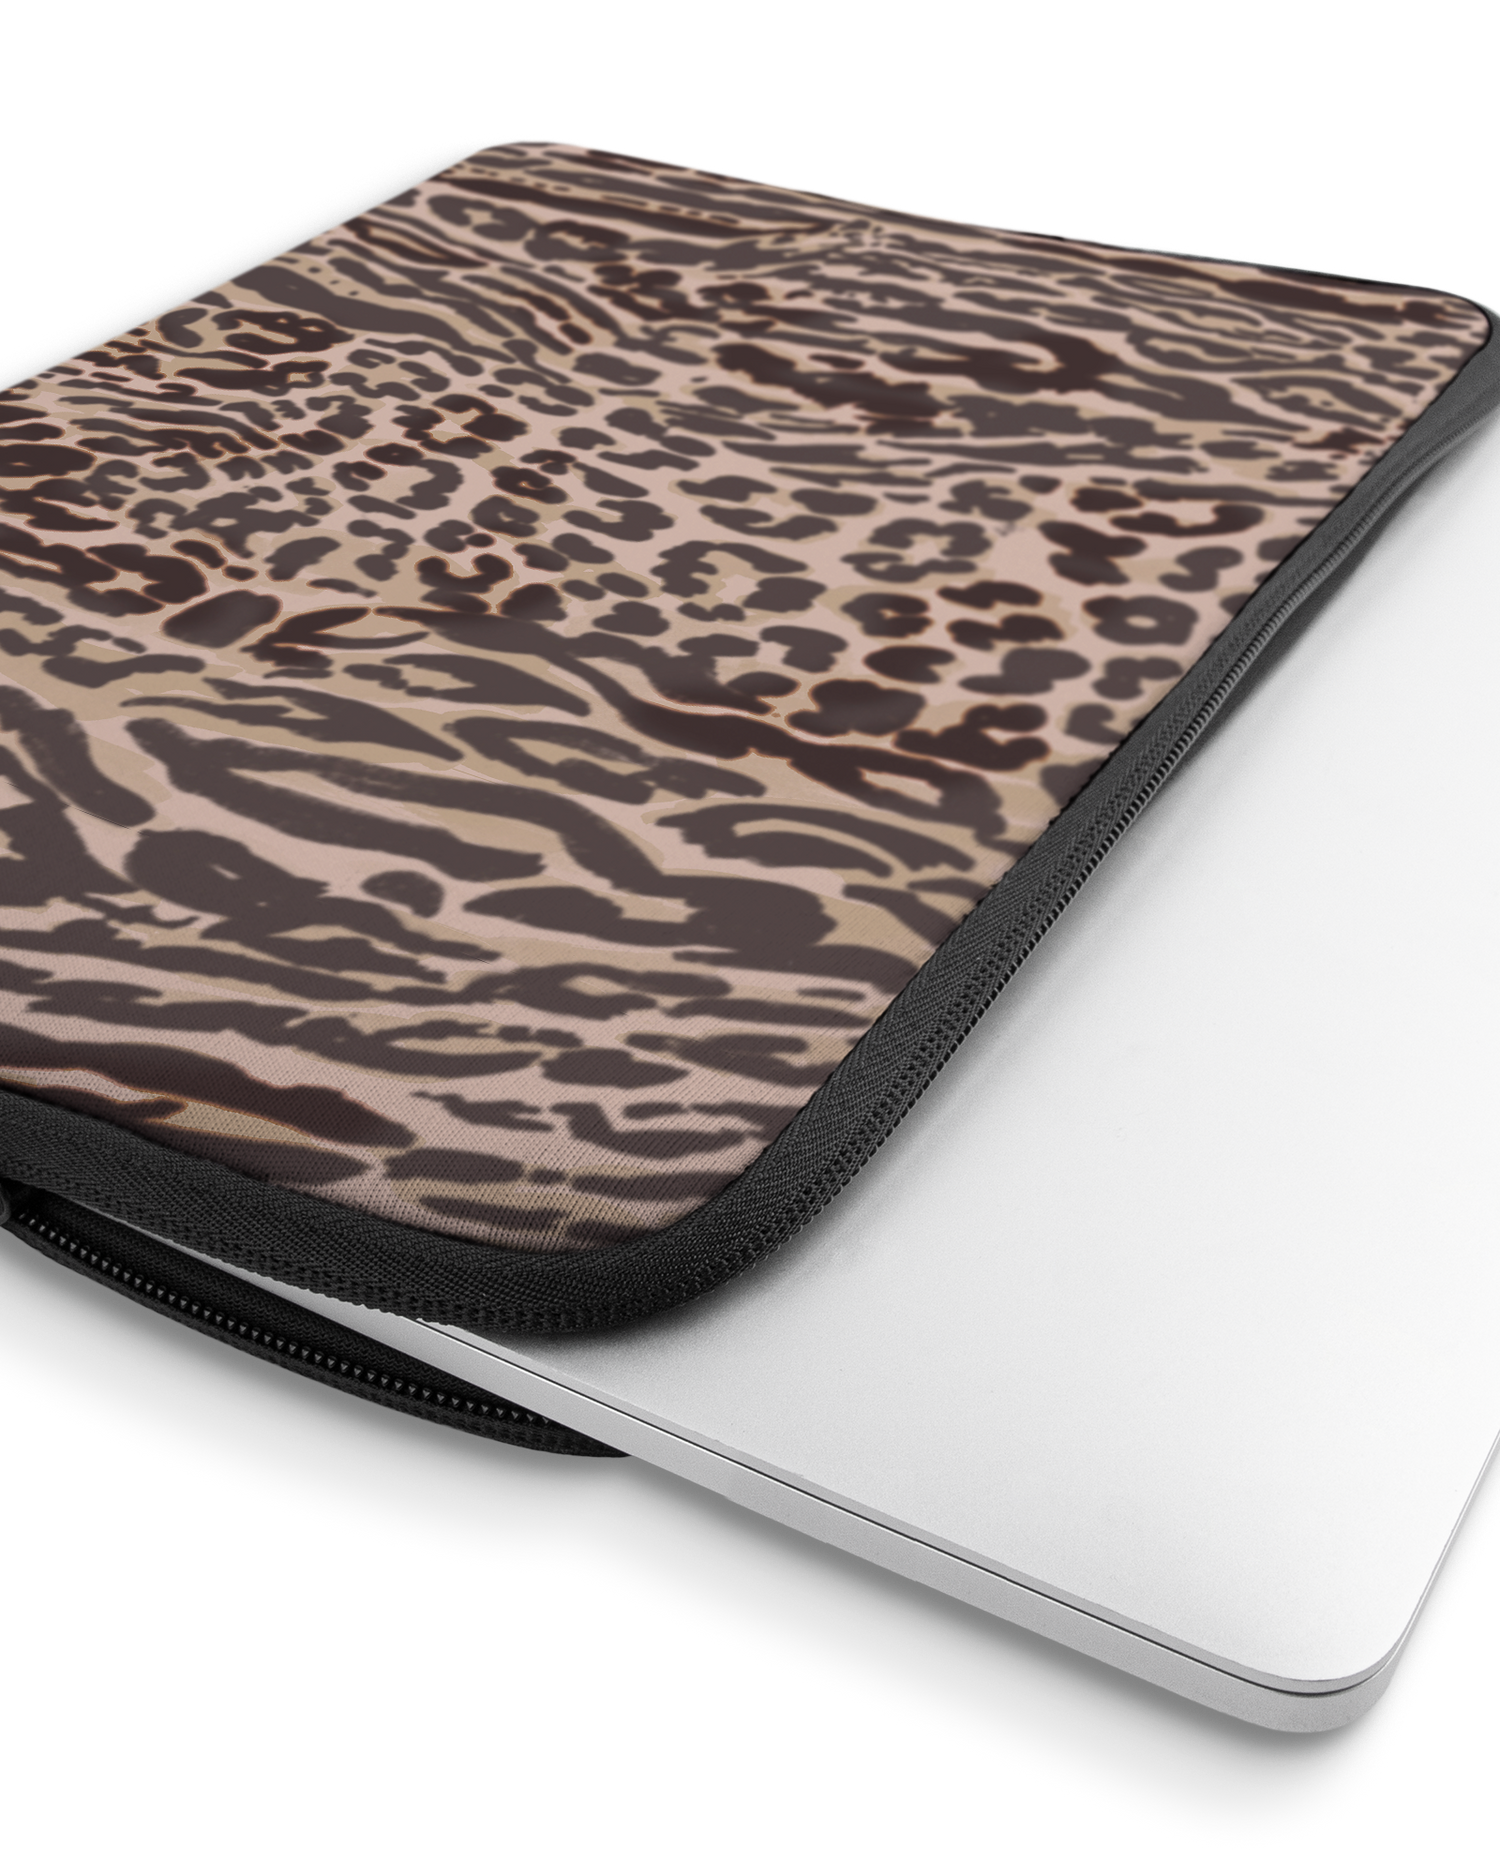 Animal Skin Tough Love Laptop Case 16 inch with device inside